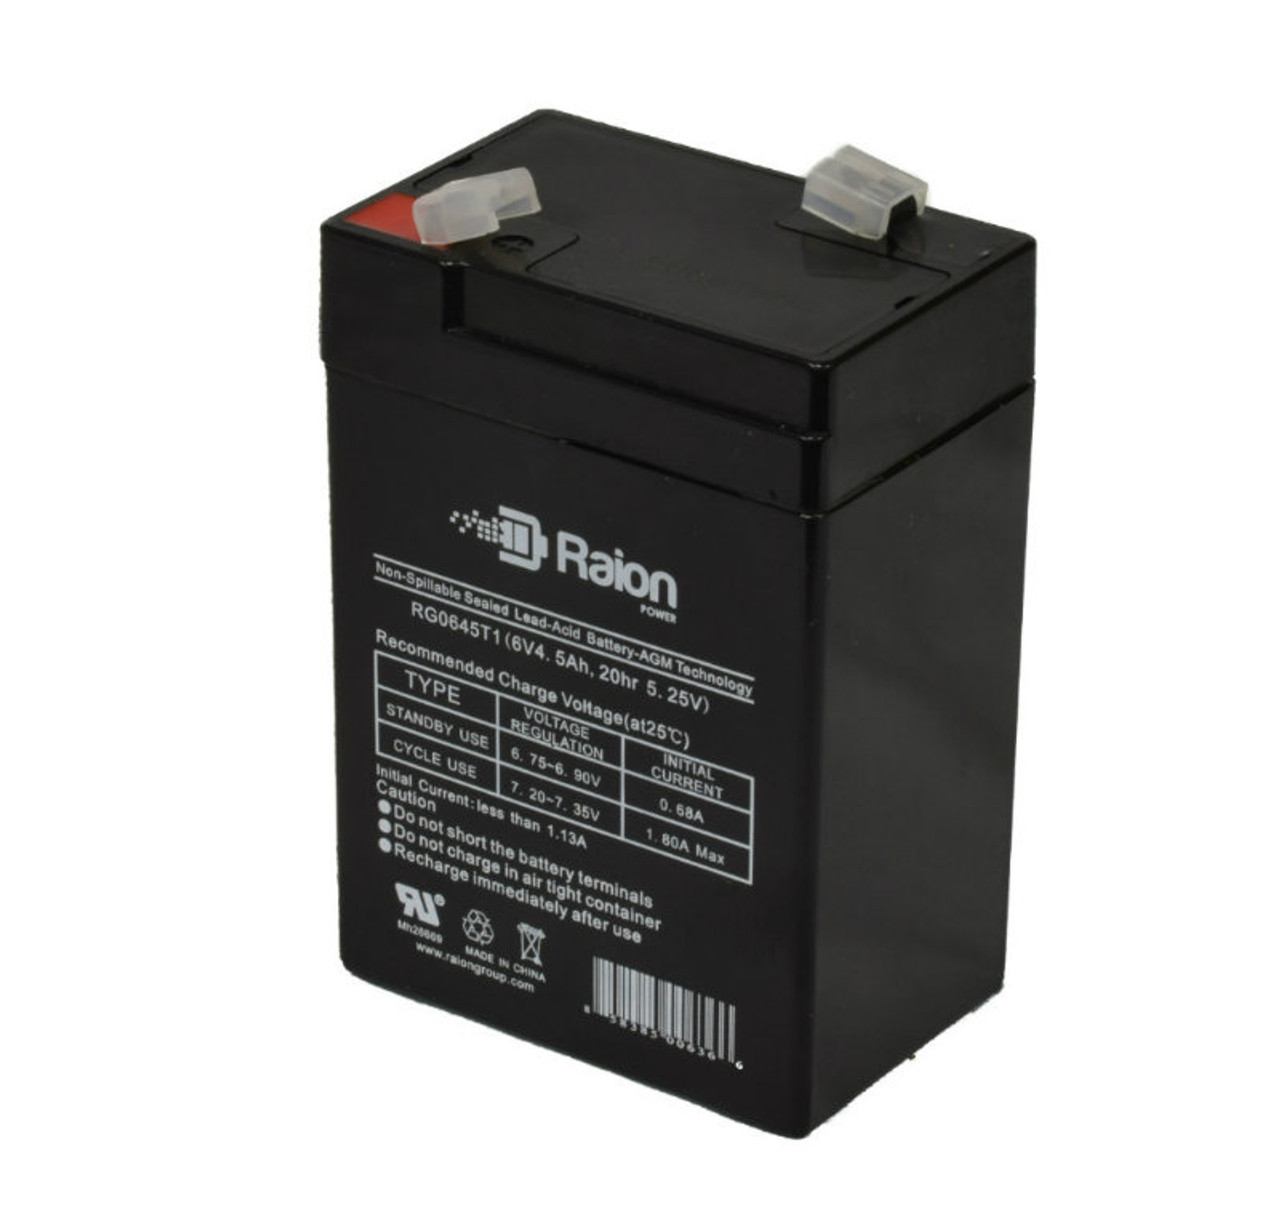 Raion Power RG0645T1 6V 4.5Ah Replacement Battery Cartridge for Peg Perego IGED1068 6V Lil Red Tractor